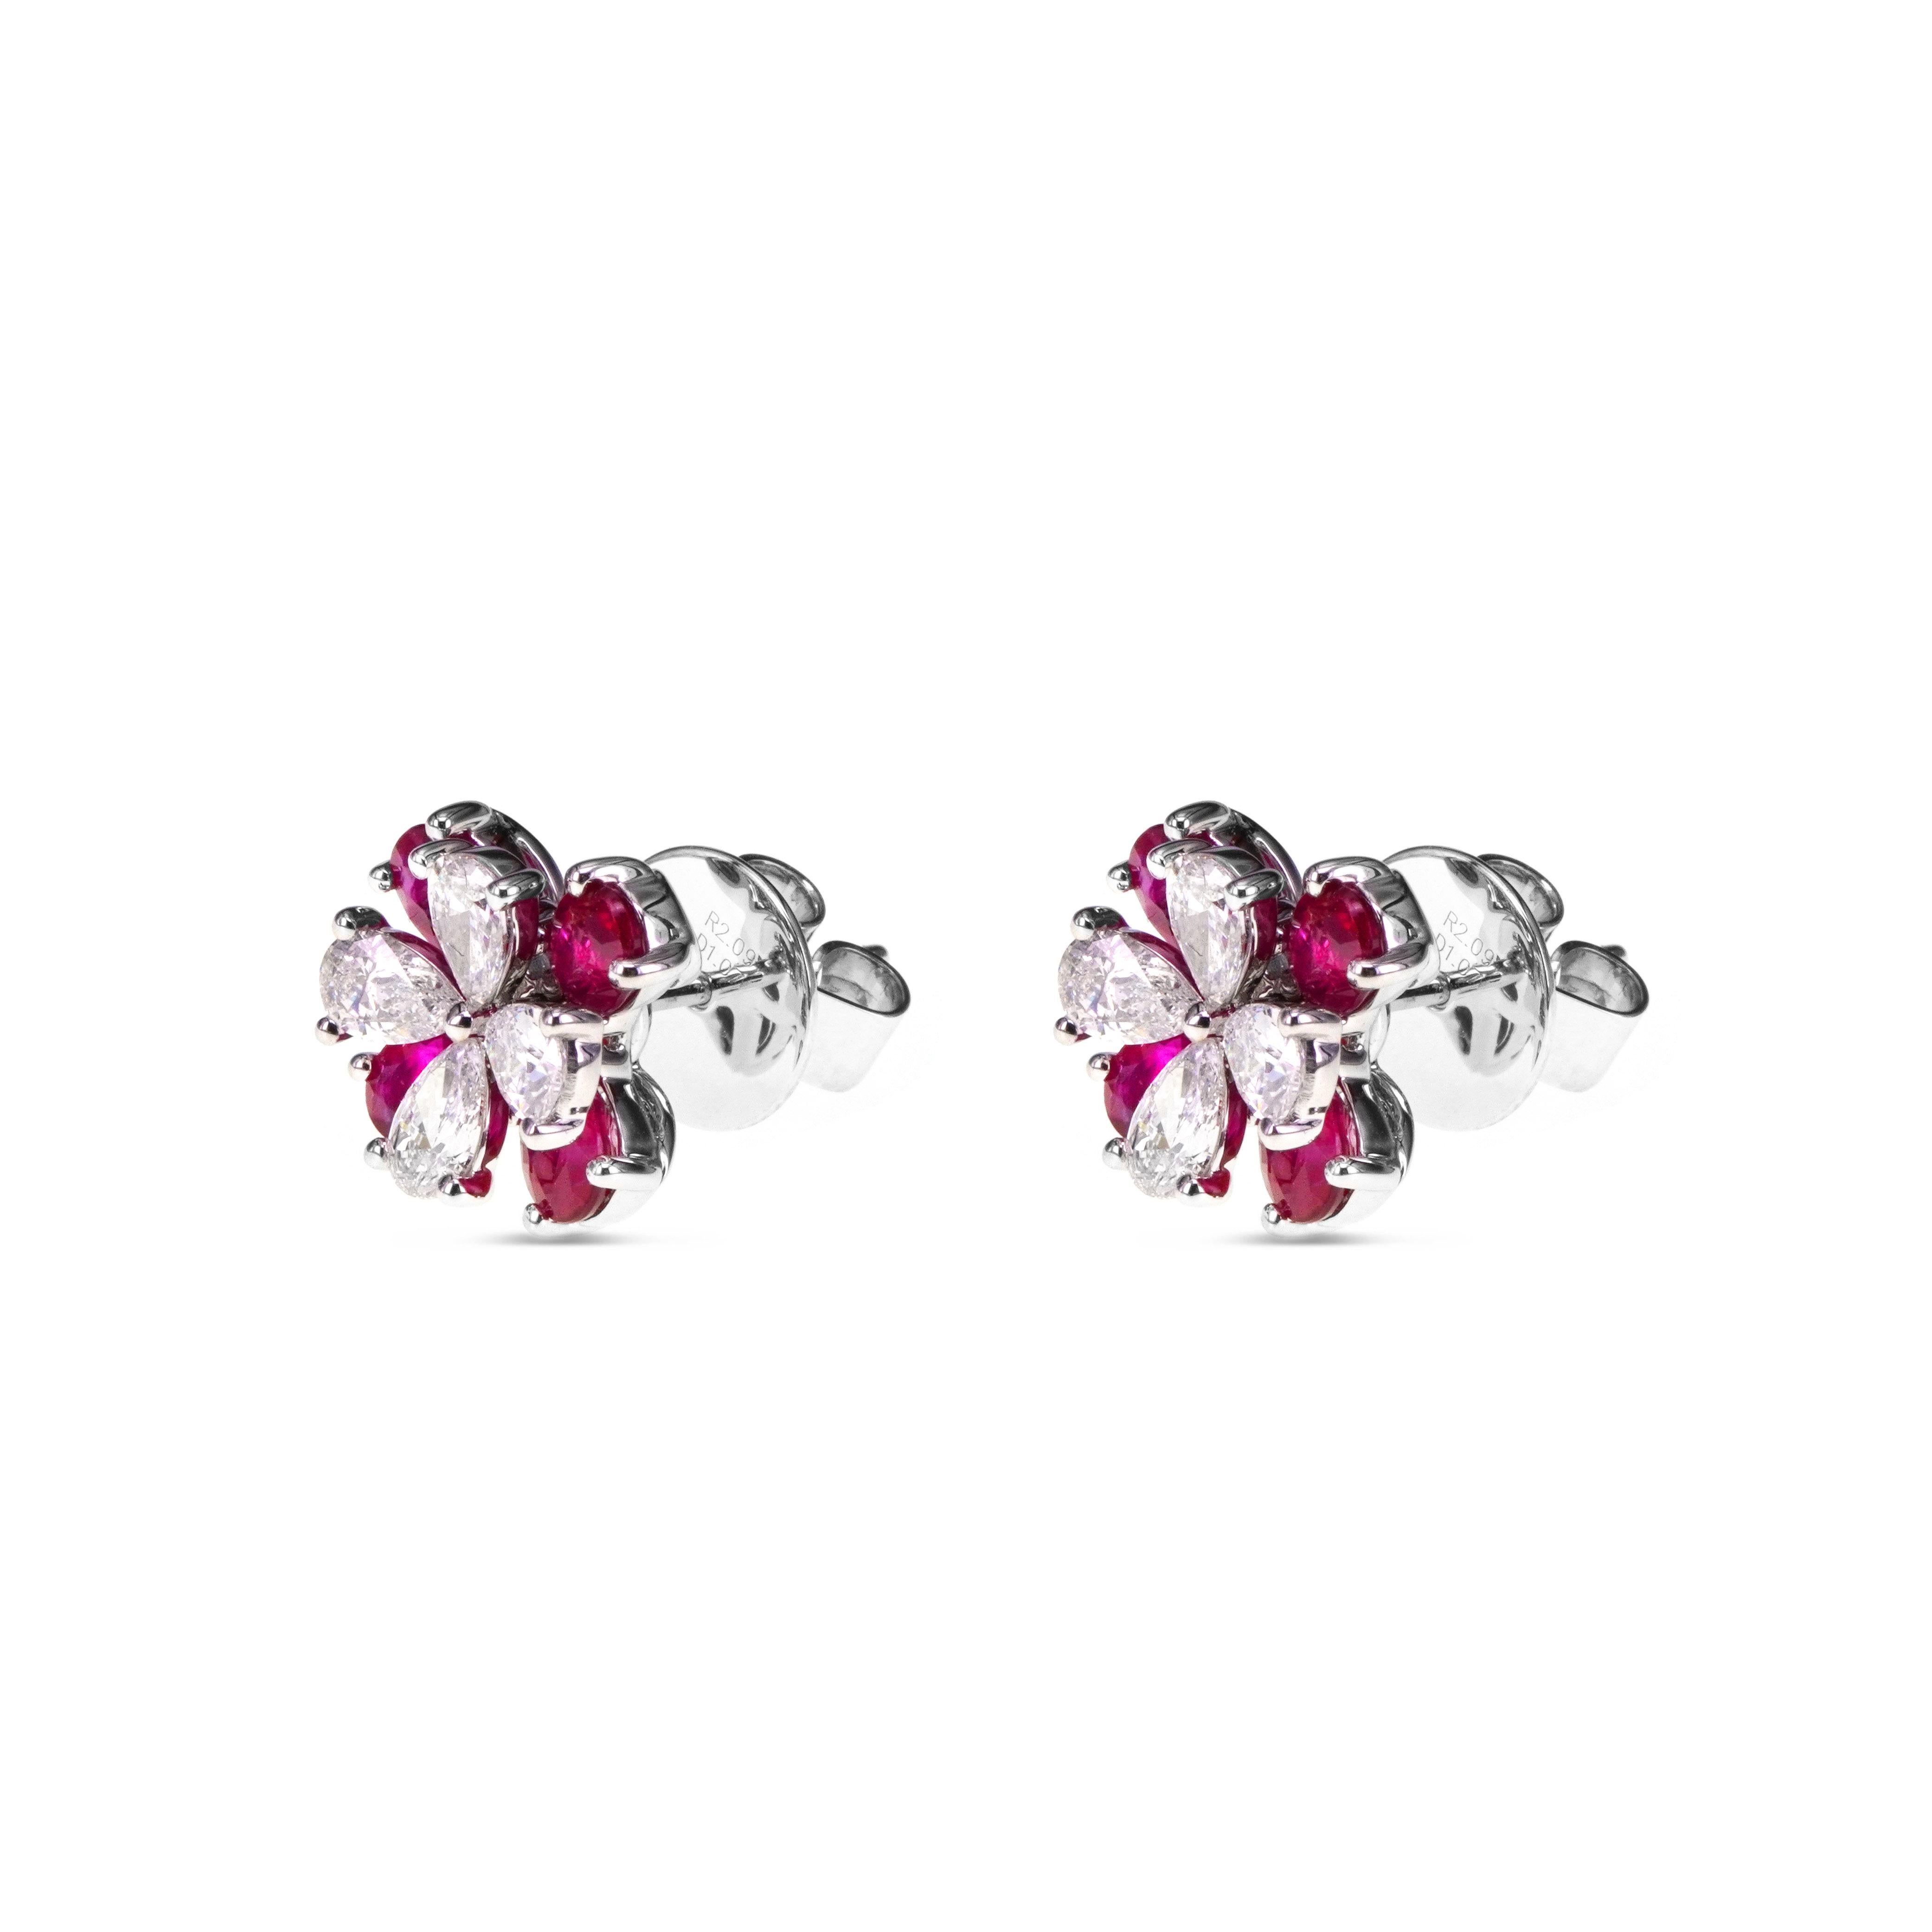 Art Nouveau Classical 2.09 Carat Vivid Red Ruby and 1.07 Carat White Diamond Earring For Sale